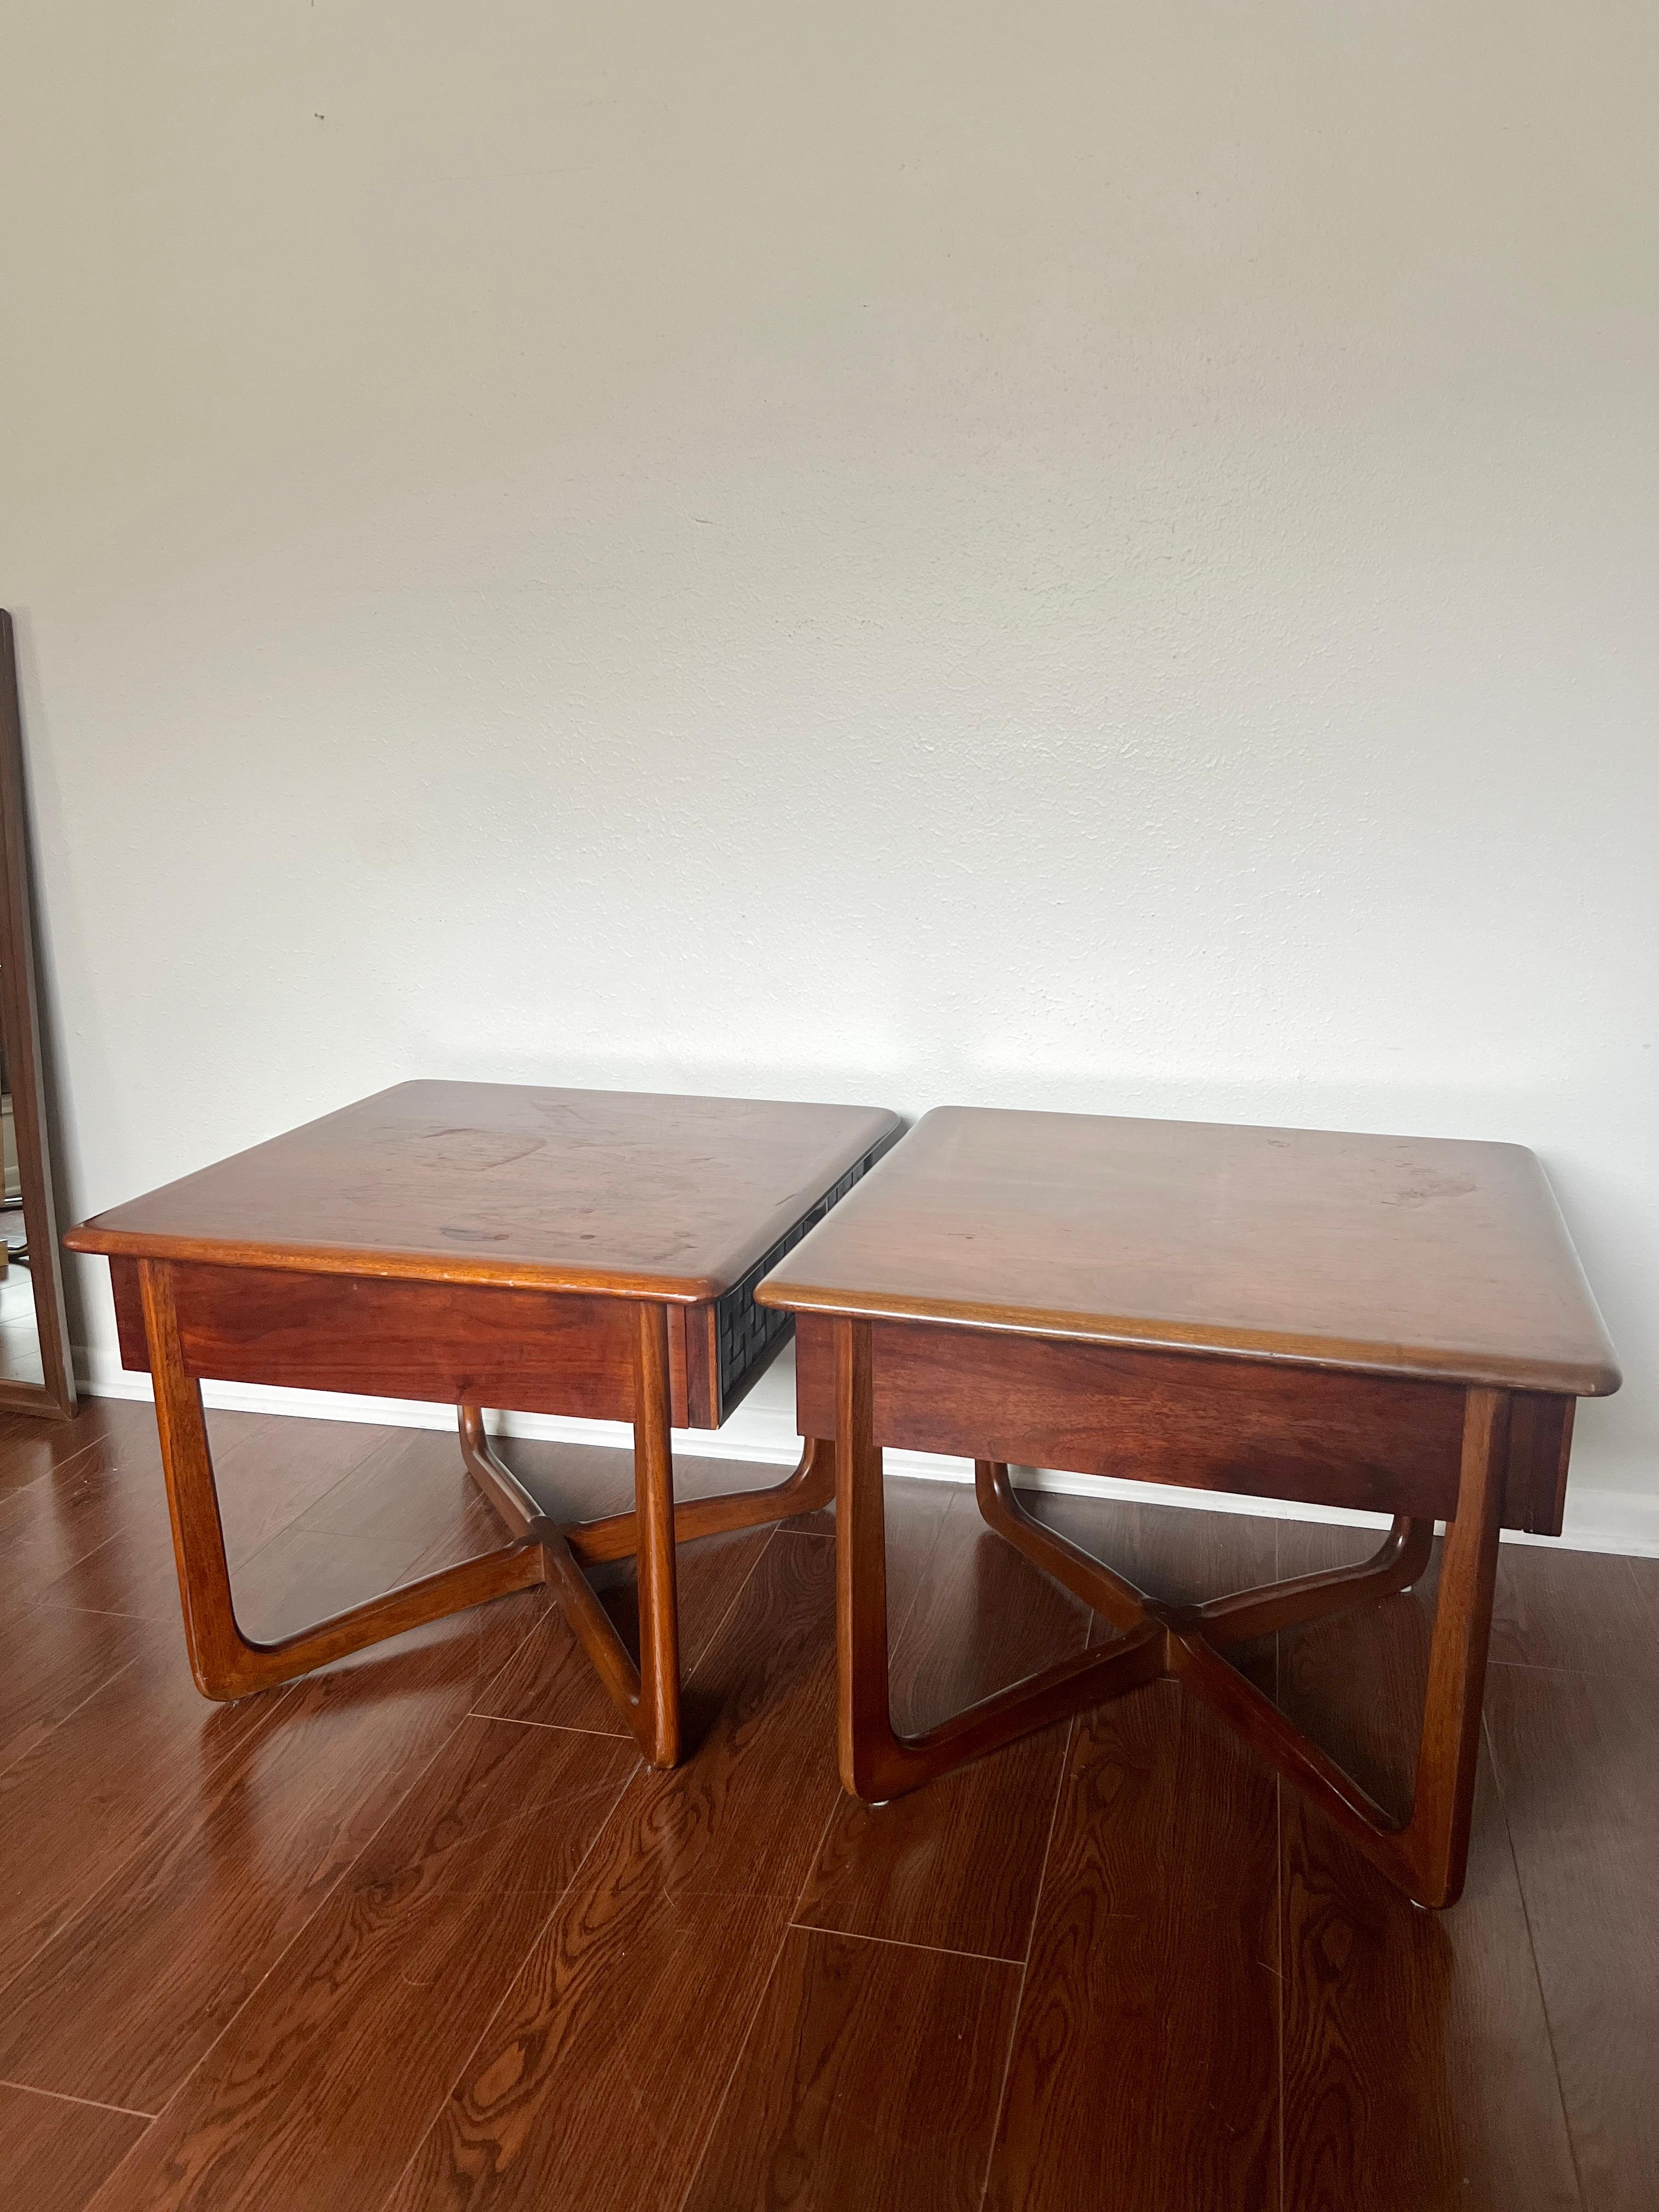 Pair of Mid-Century Modern Lane Perception Side Tables with a Cross Cross Base 3